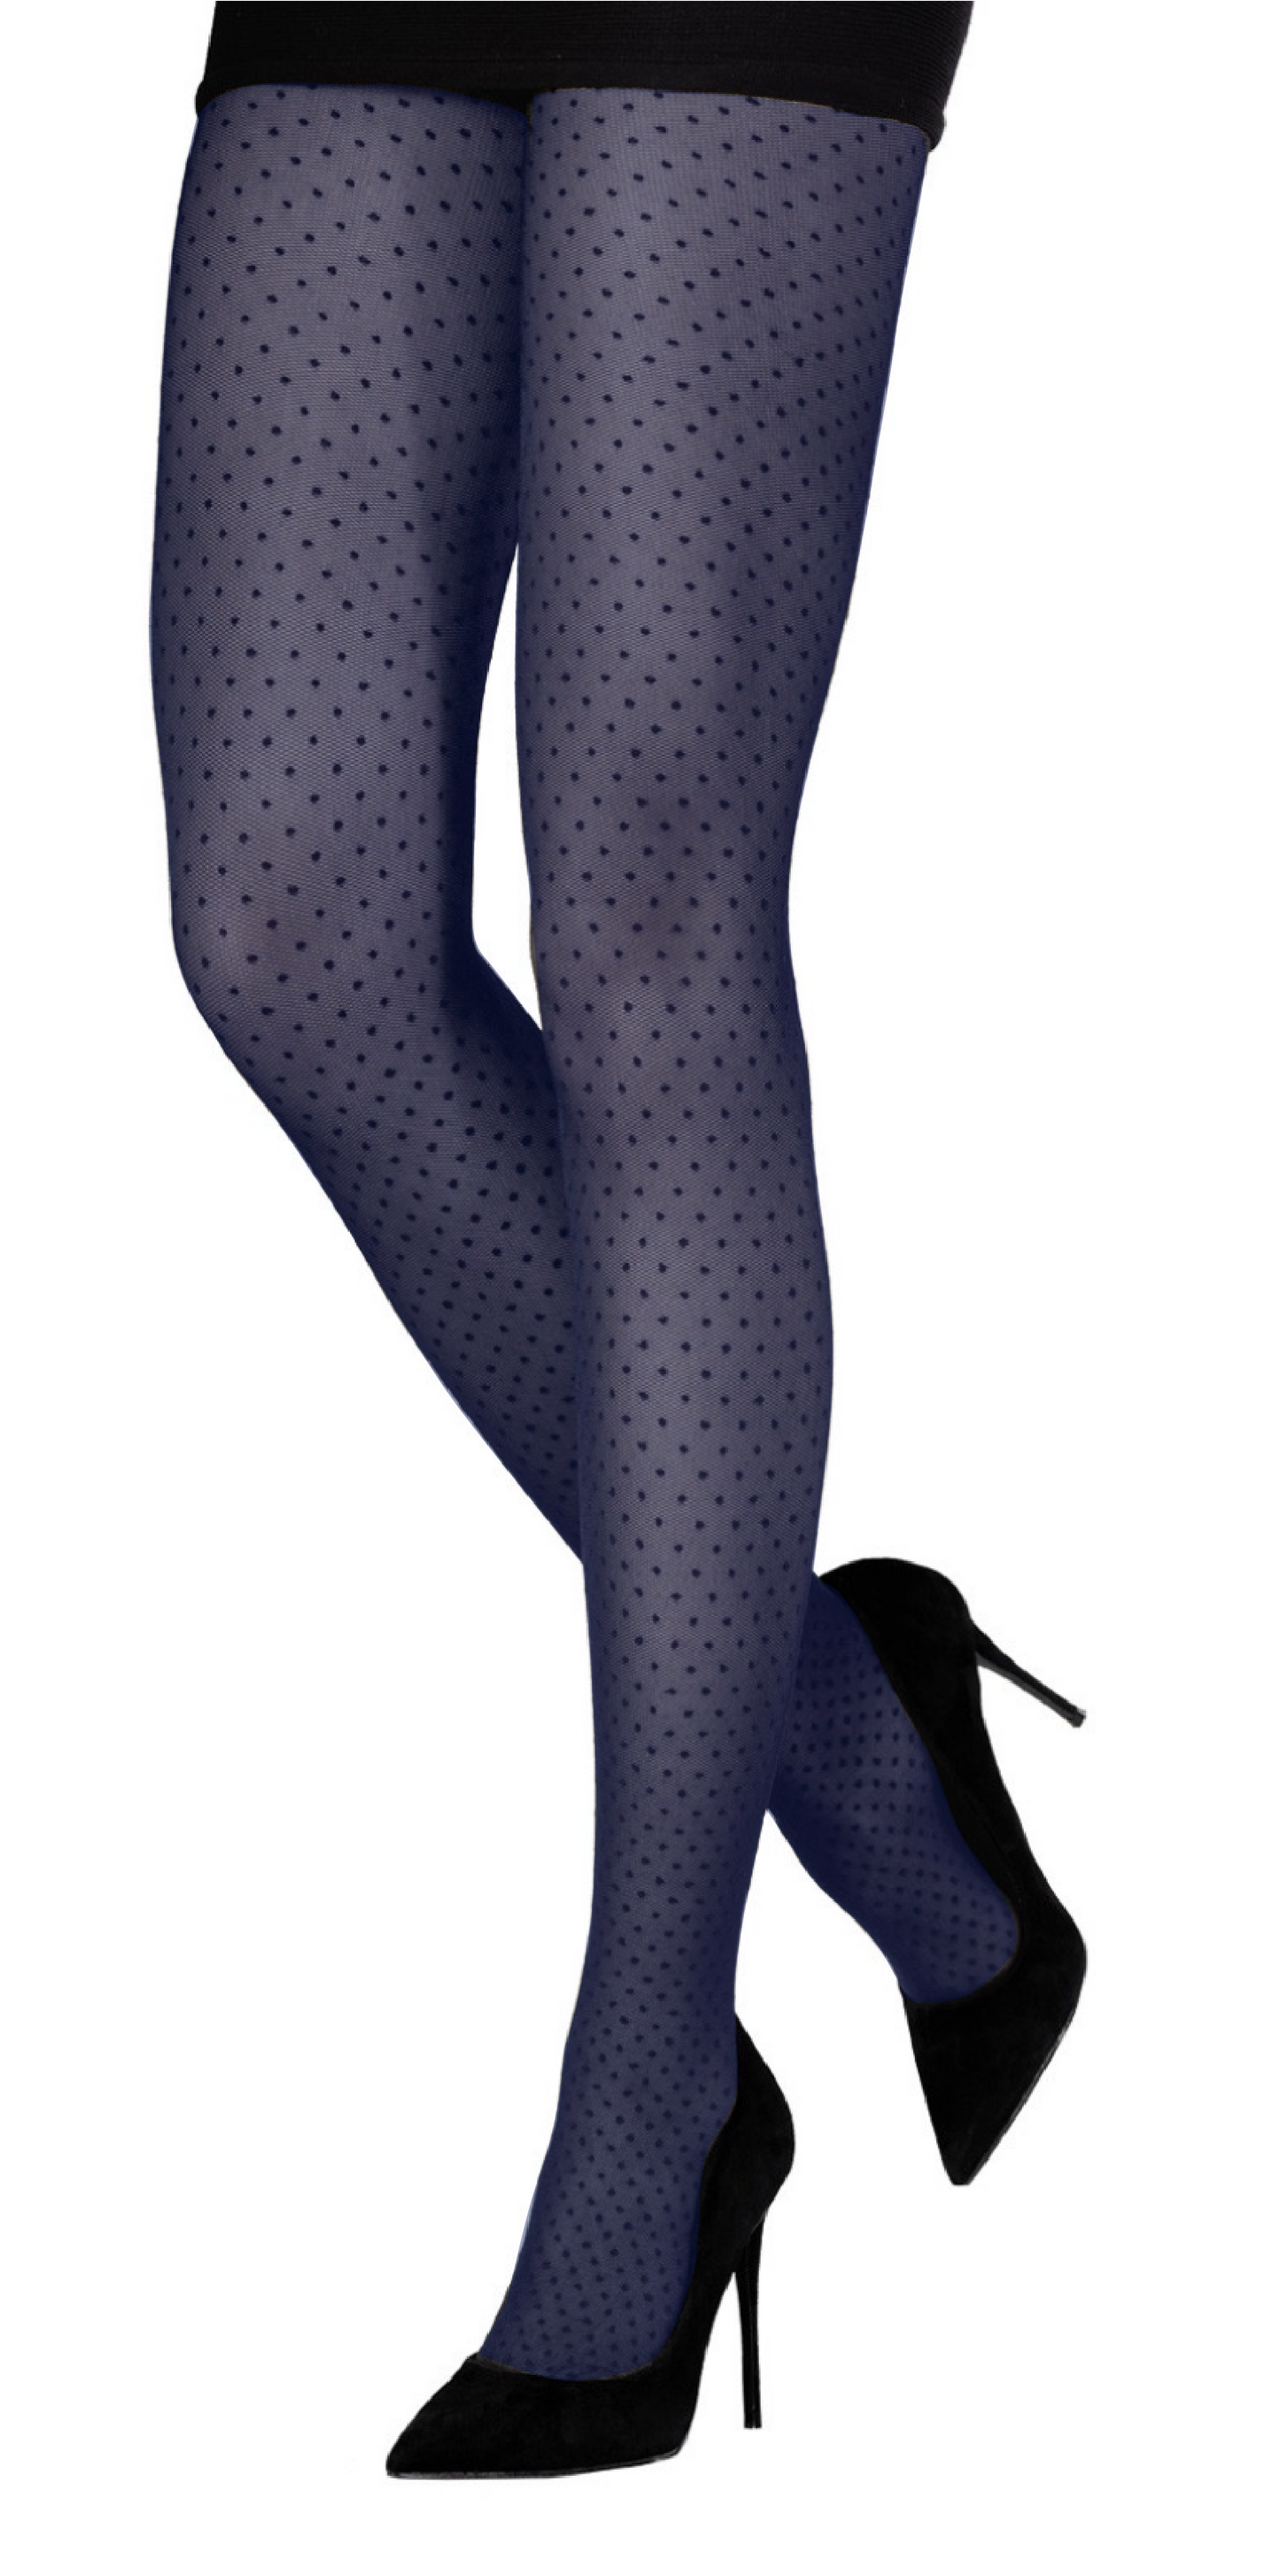 Emilio Cavallini 5619.1.88 All Over Dot Tights - navy micro mesh fashion tights with polka dot spot pattern